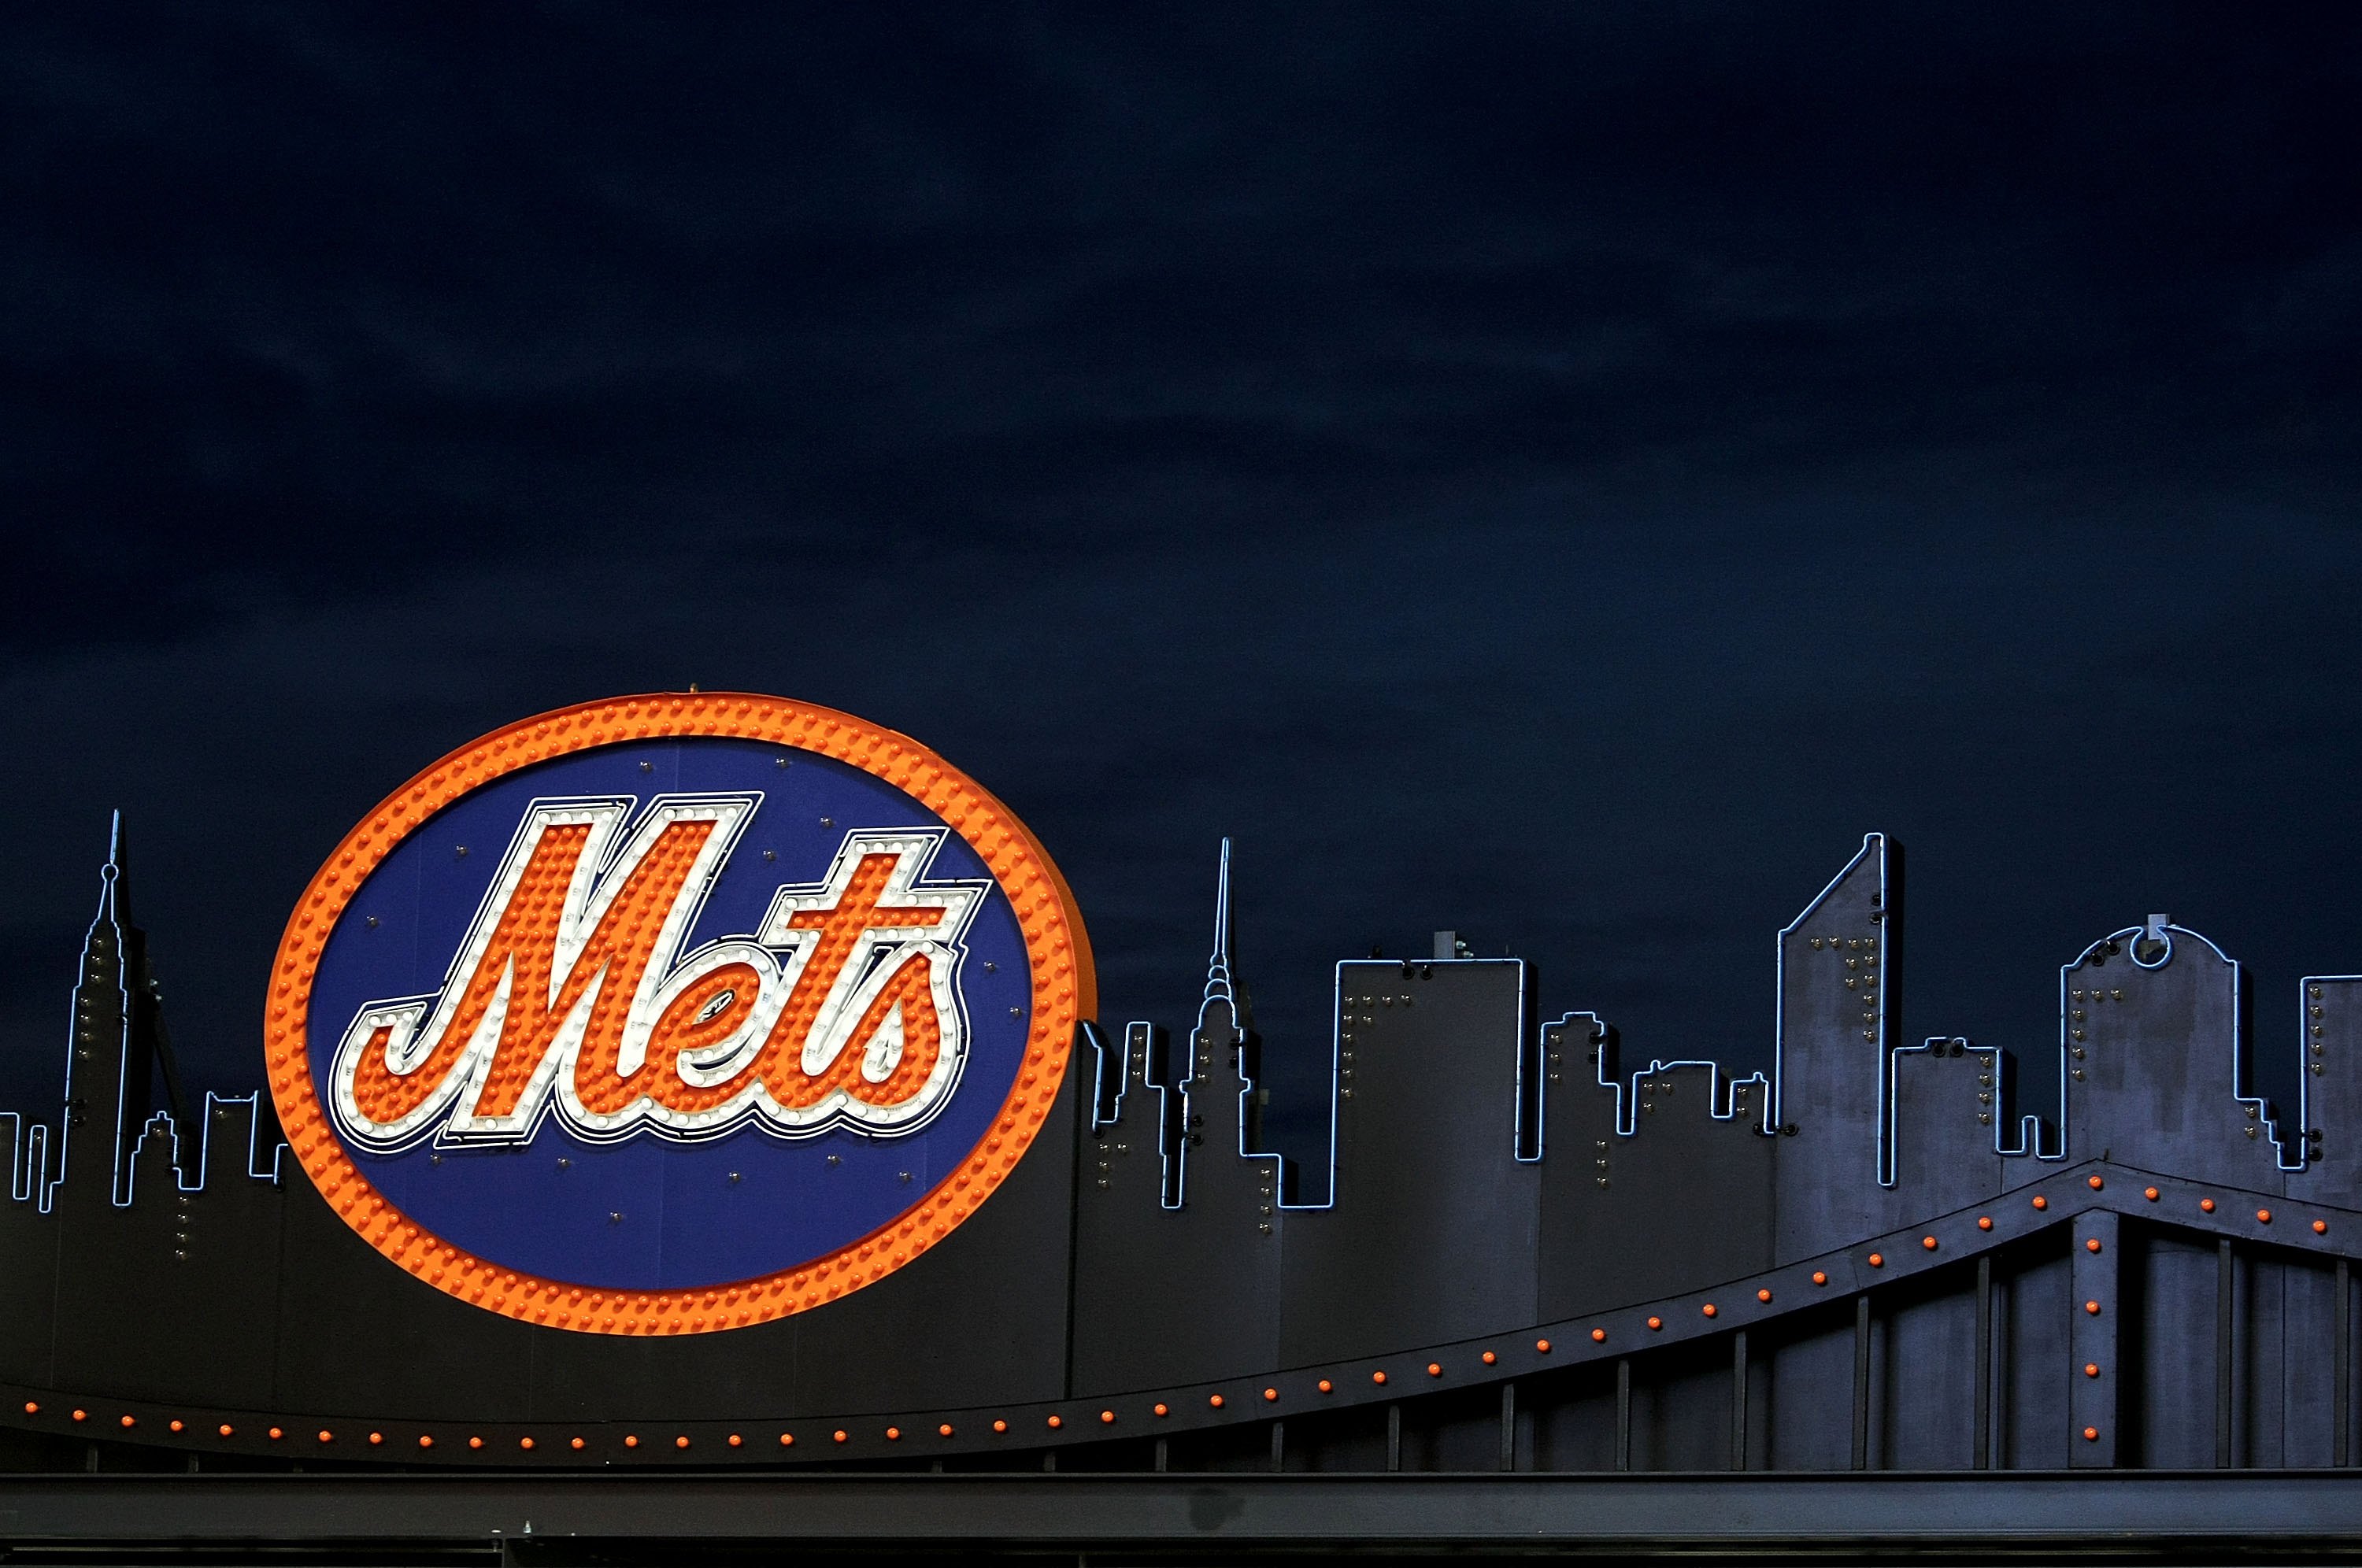 FLUSHING, NY - APRIL 13: A Mets logo inside the ground is seen on opening day at Citi Field on April 13, 2009 in the Flushing neighborhood of the Queens borough of New York City. This is the first regular season MLB game being played at the new venue whic